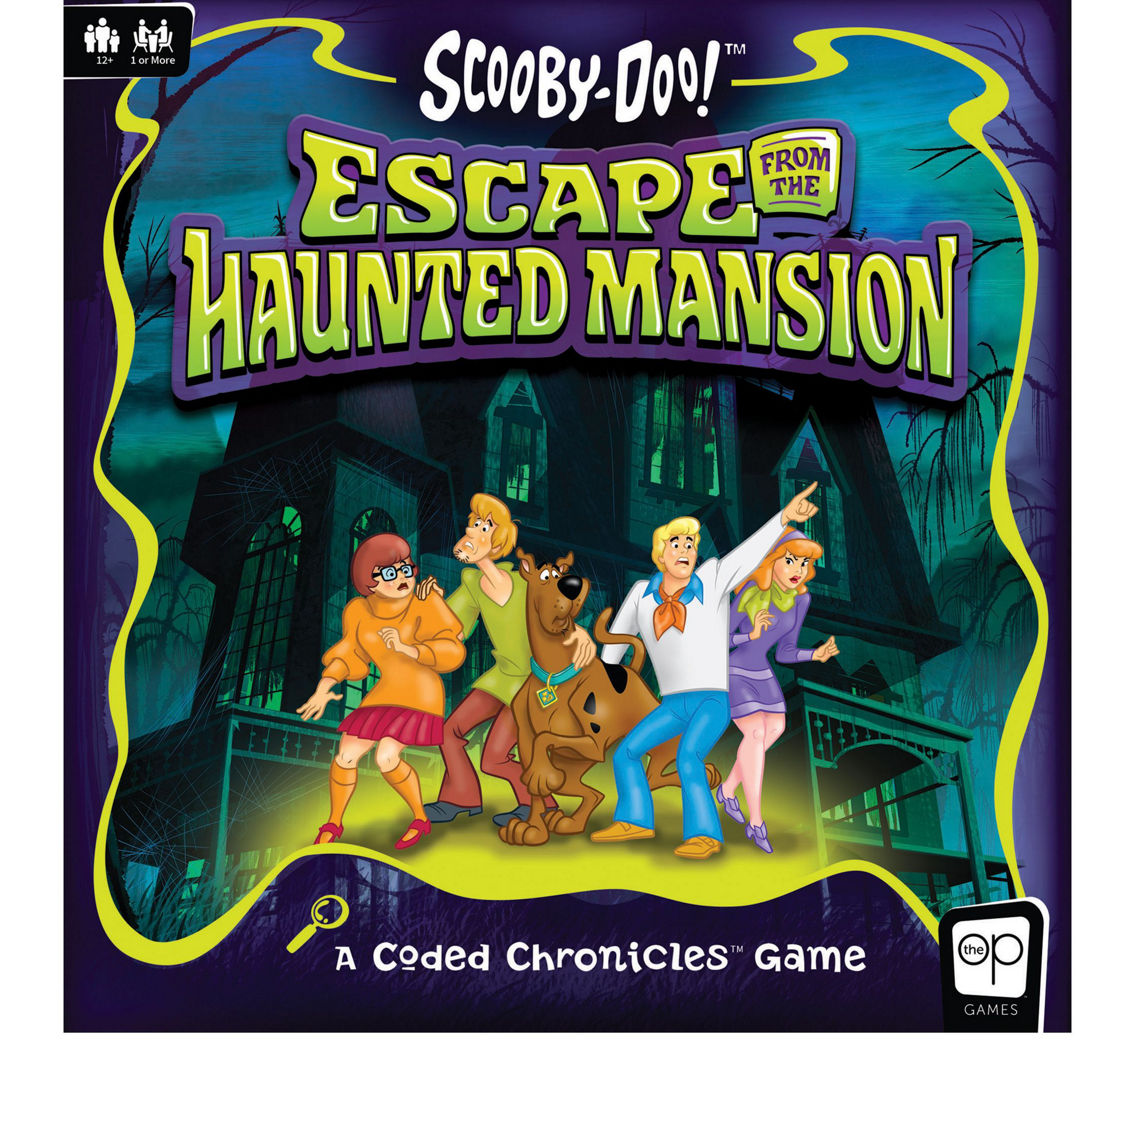 USAopoly Scooby-Doo! - Escape from the Haunted Mansion - Image 3 of 5